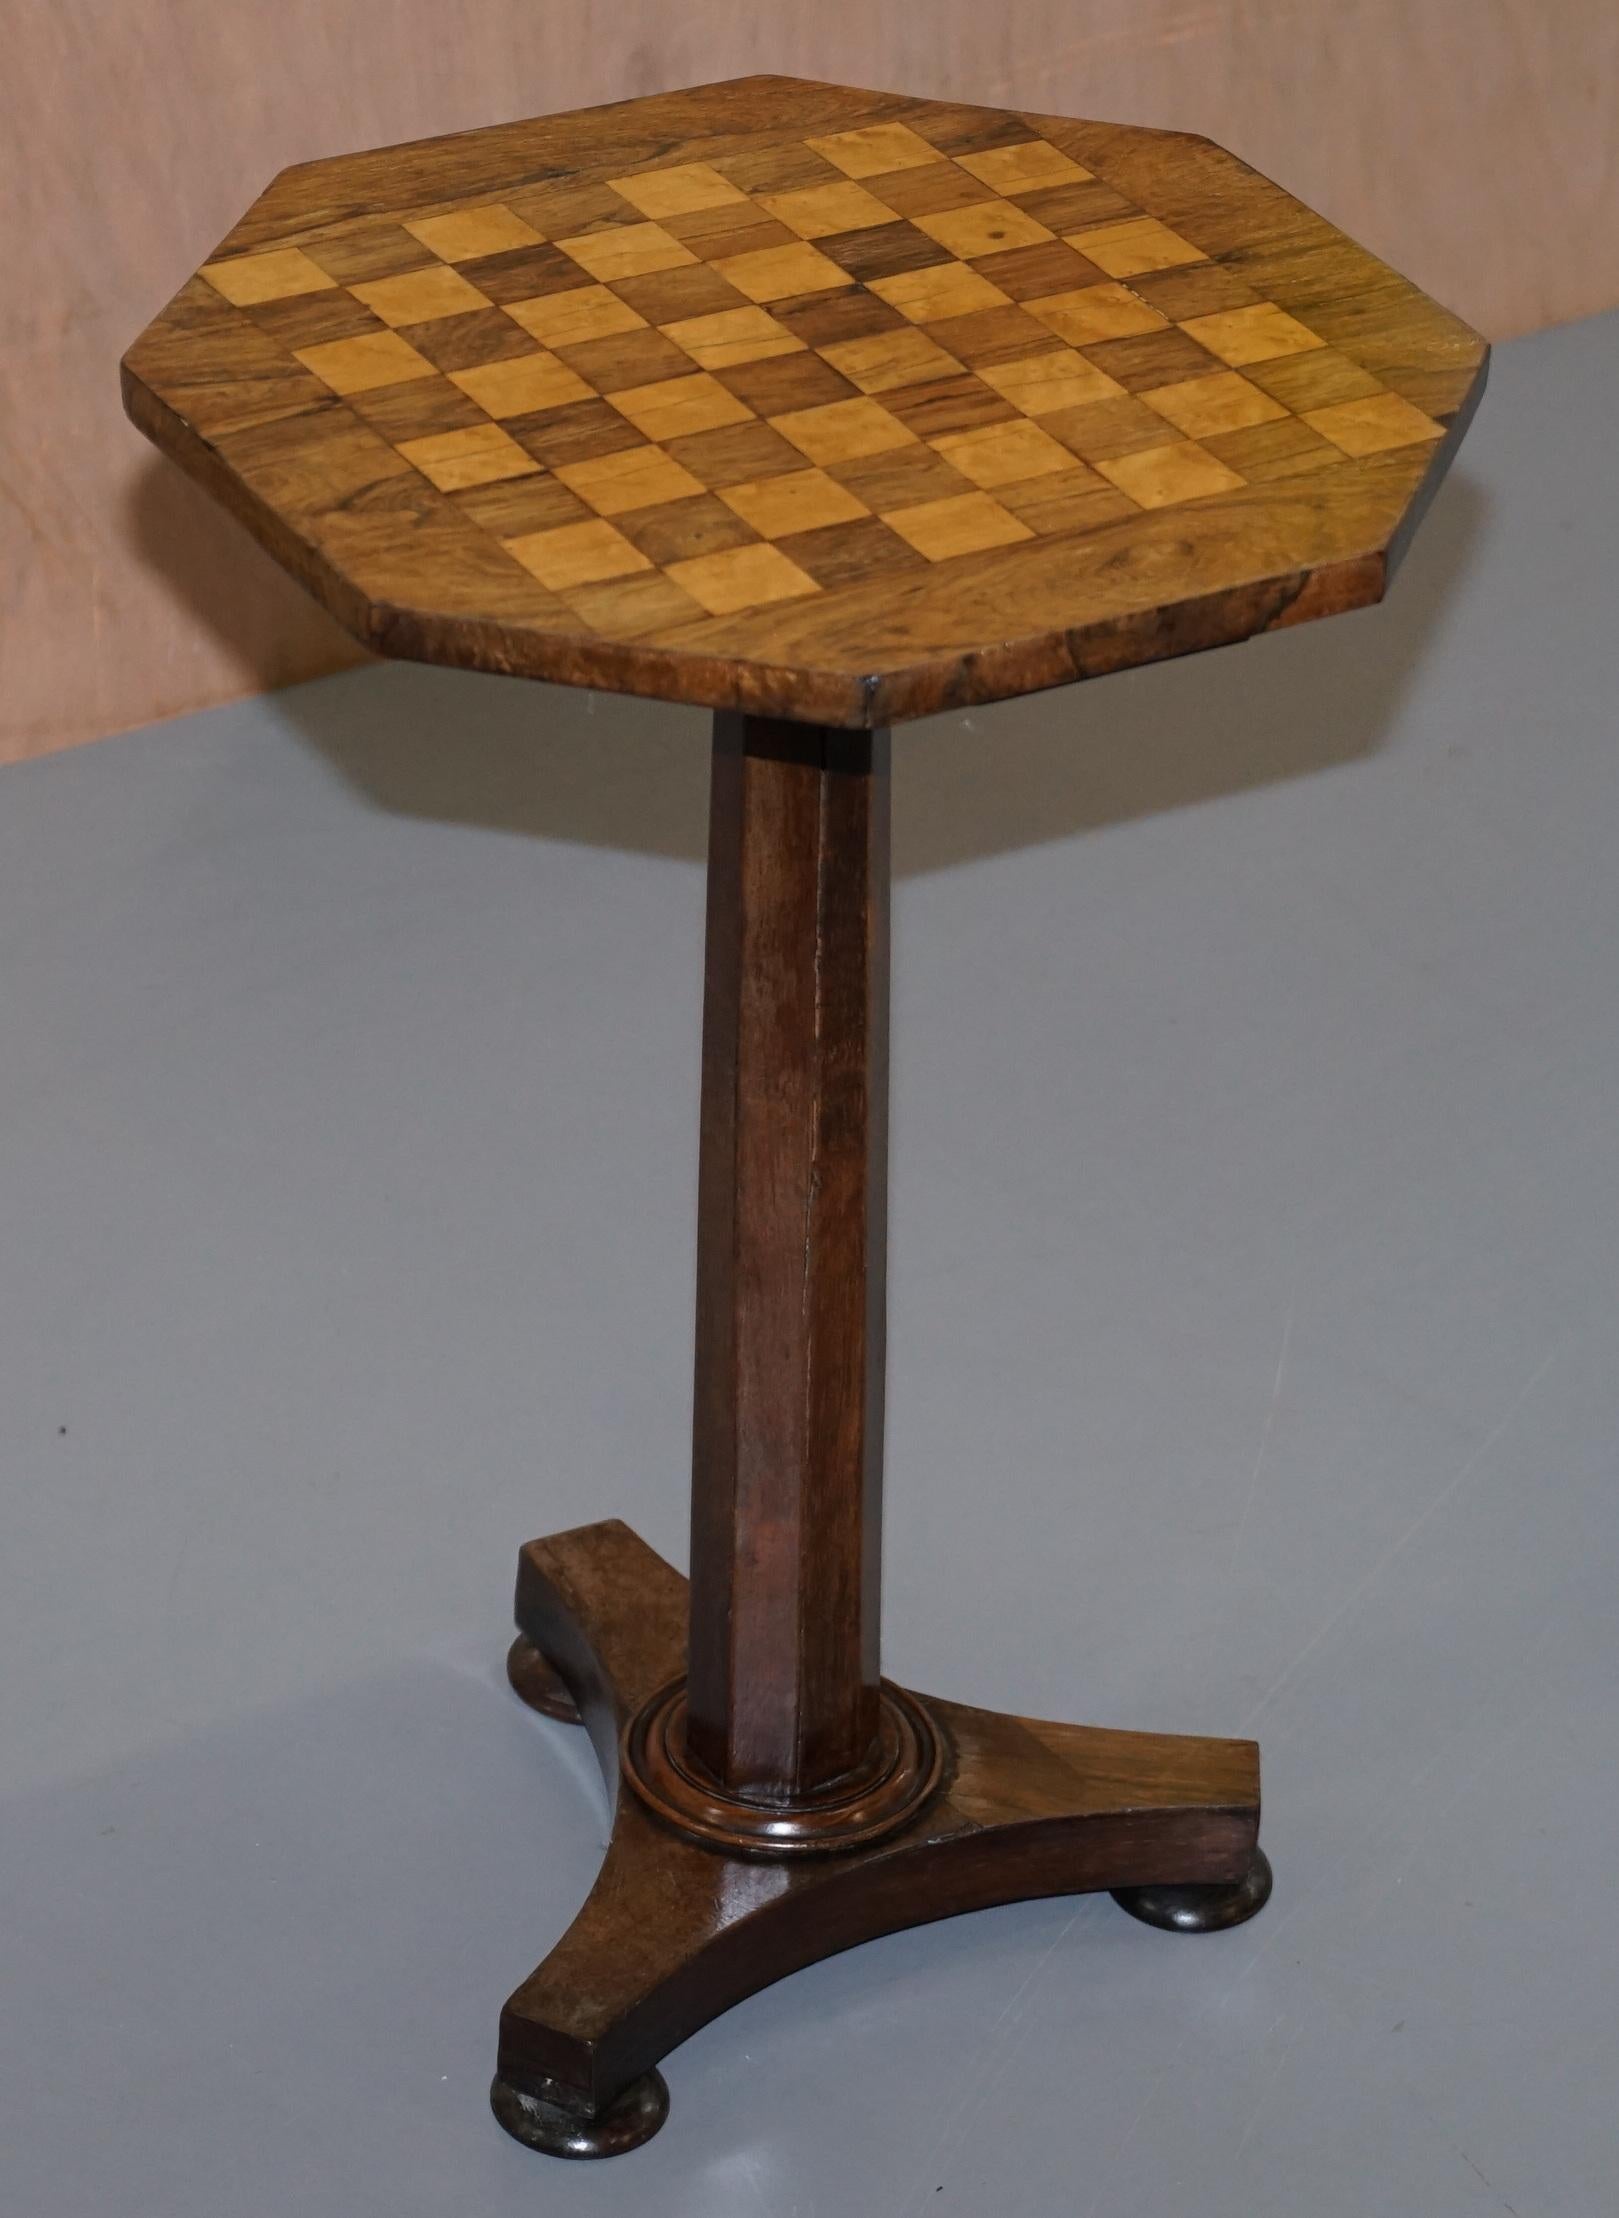 We are delighted to offer for sale this lovely original circa 1860 Redwood pedestal Chess games table

A very good looking well made and function piece of furniture, extremely decorative, its made with glorious rosewood which is one of my favourite